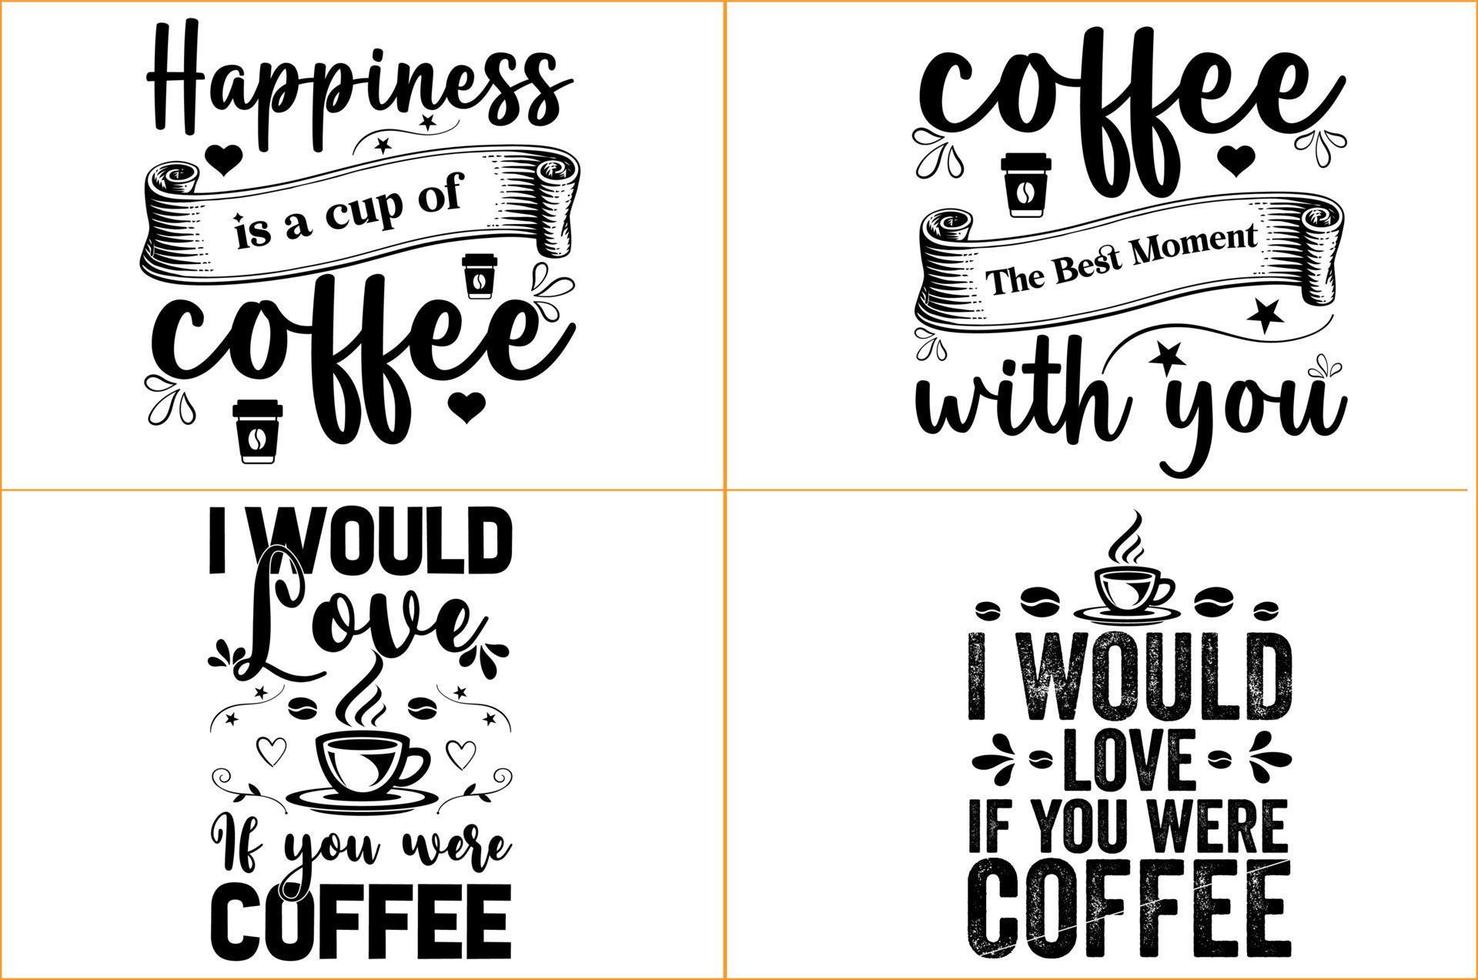 coffee motivation quotes typography or coffee typography t shirt vector